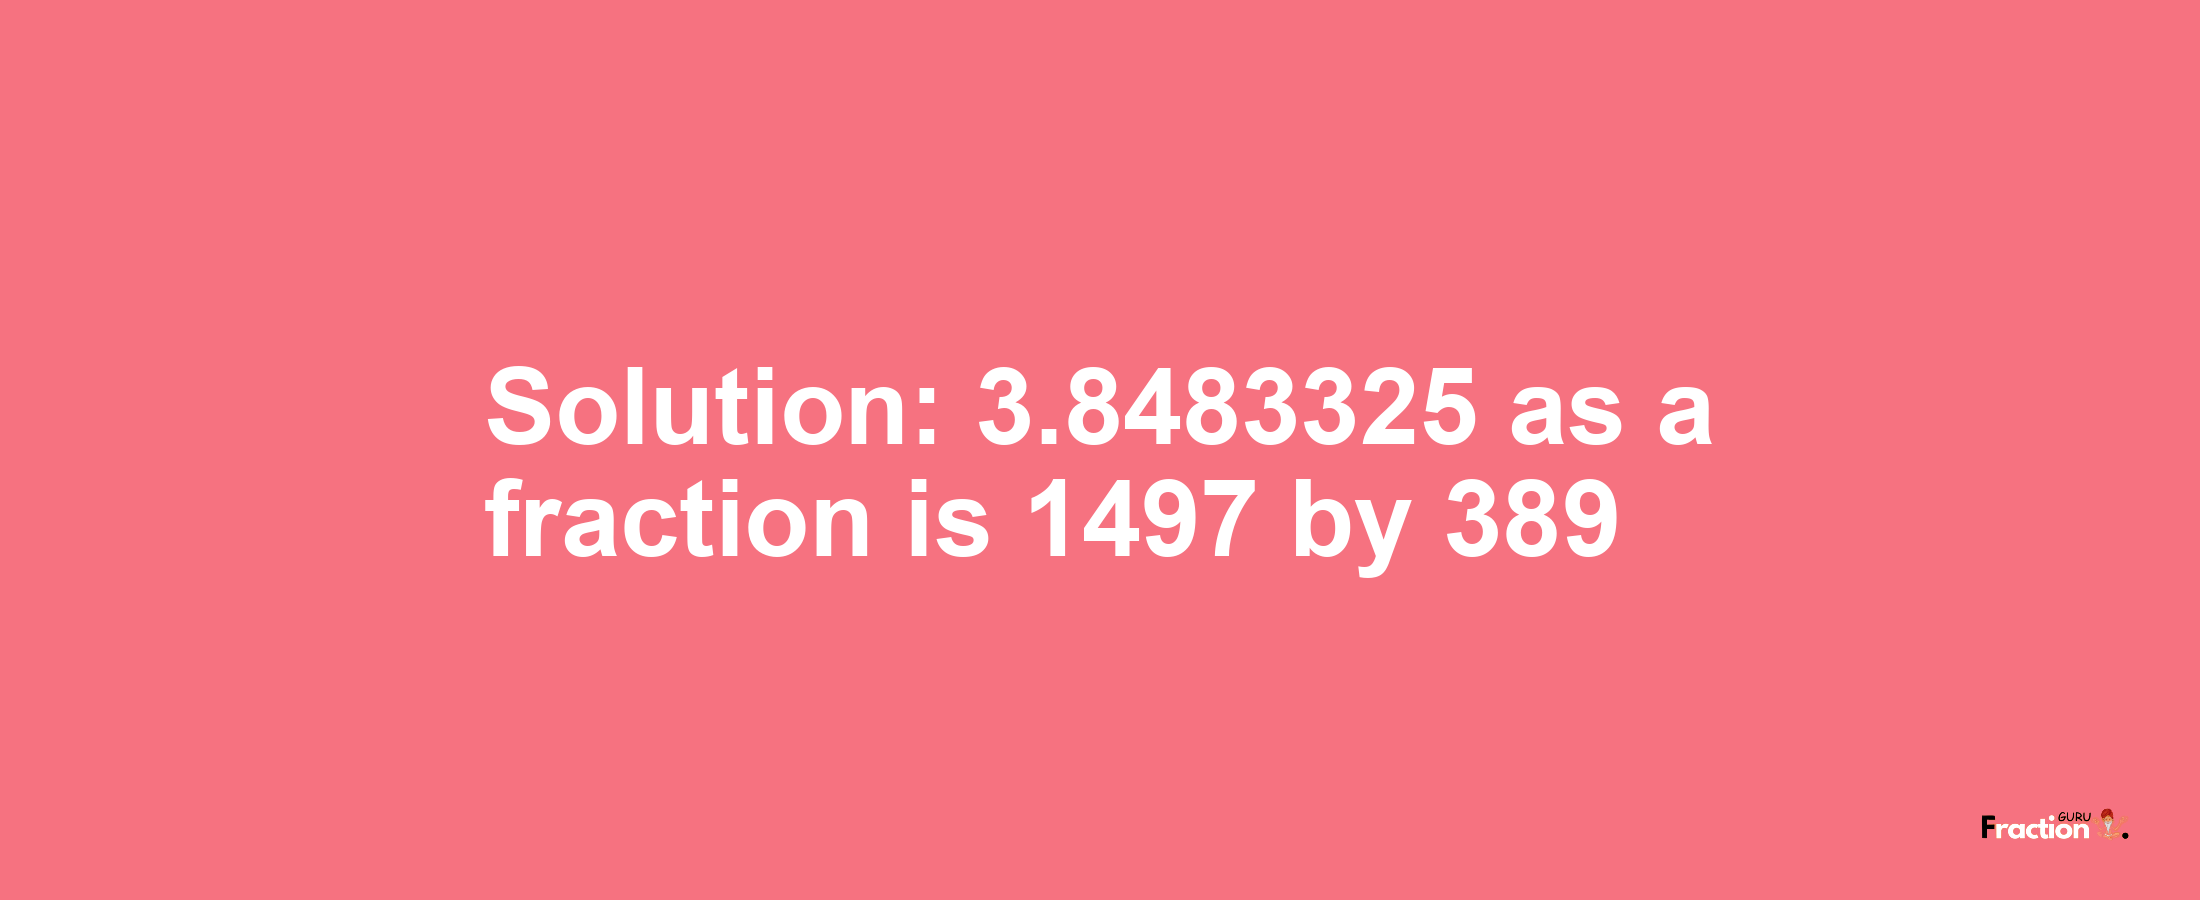 Solution:3.8483325 as a fraction is 1497/389